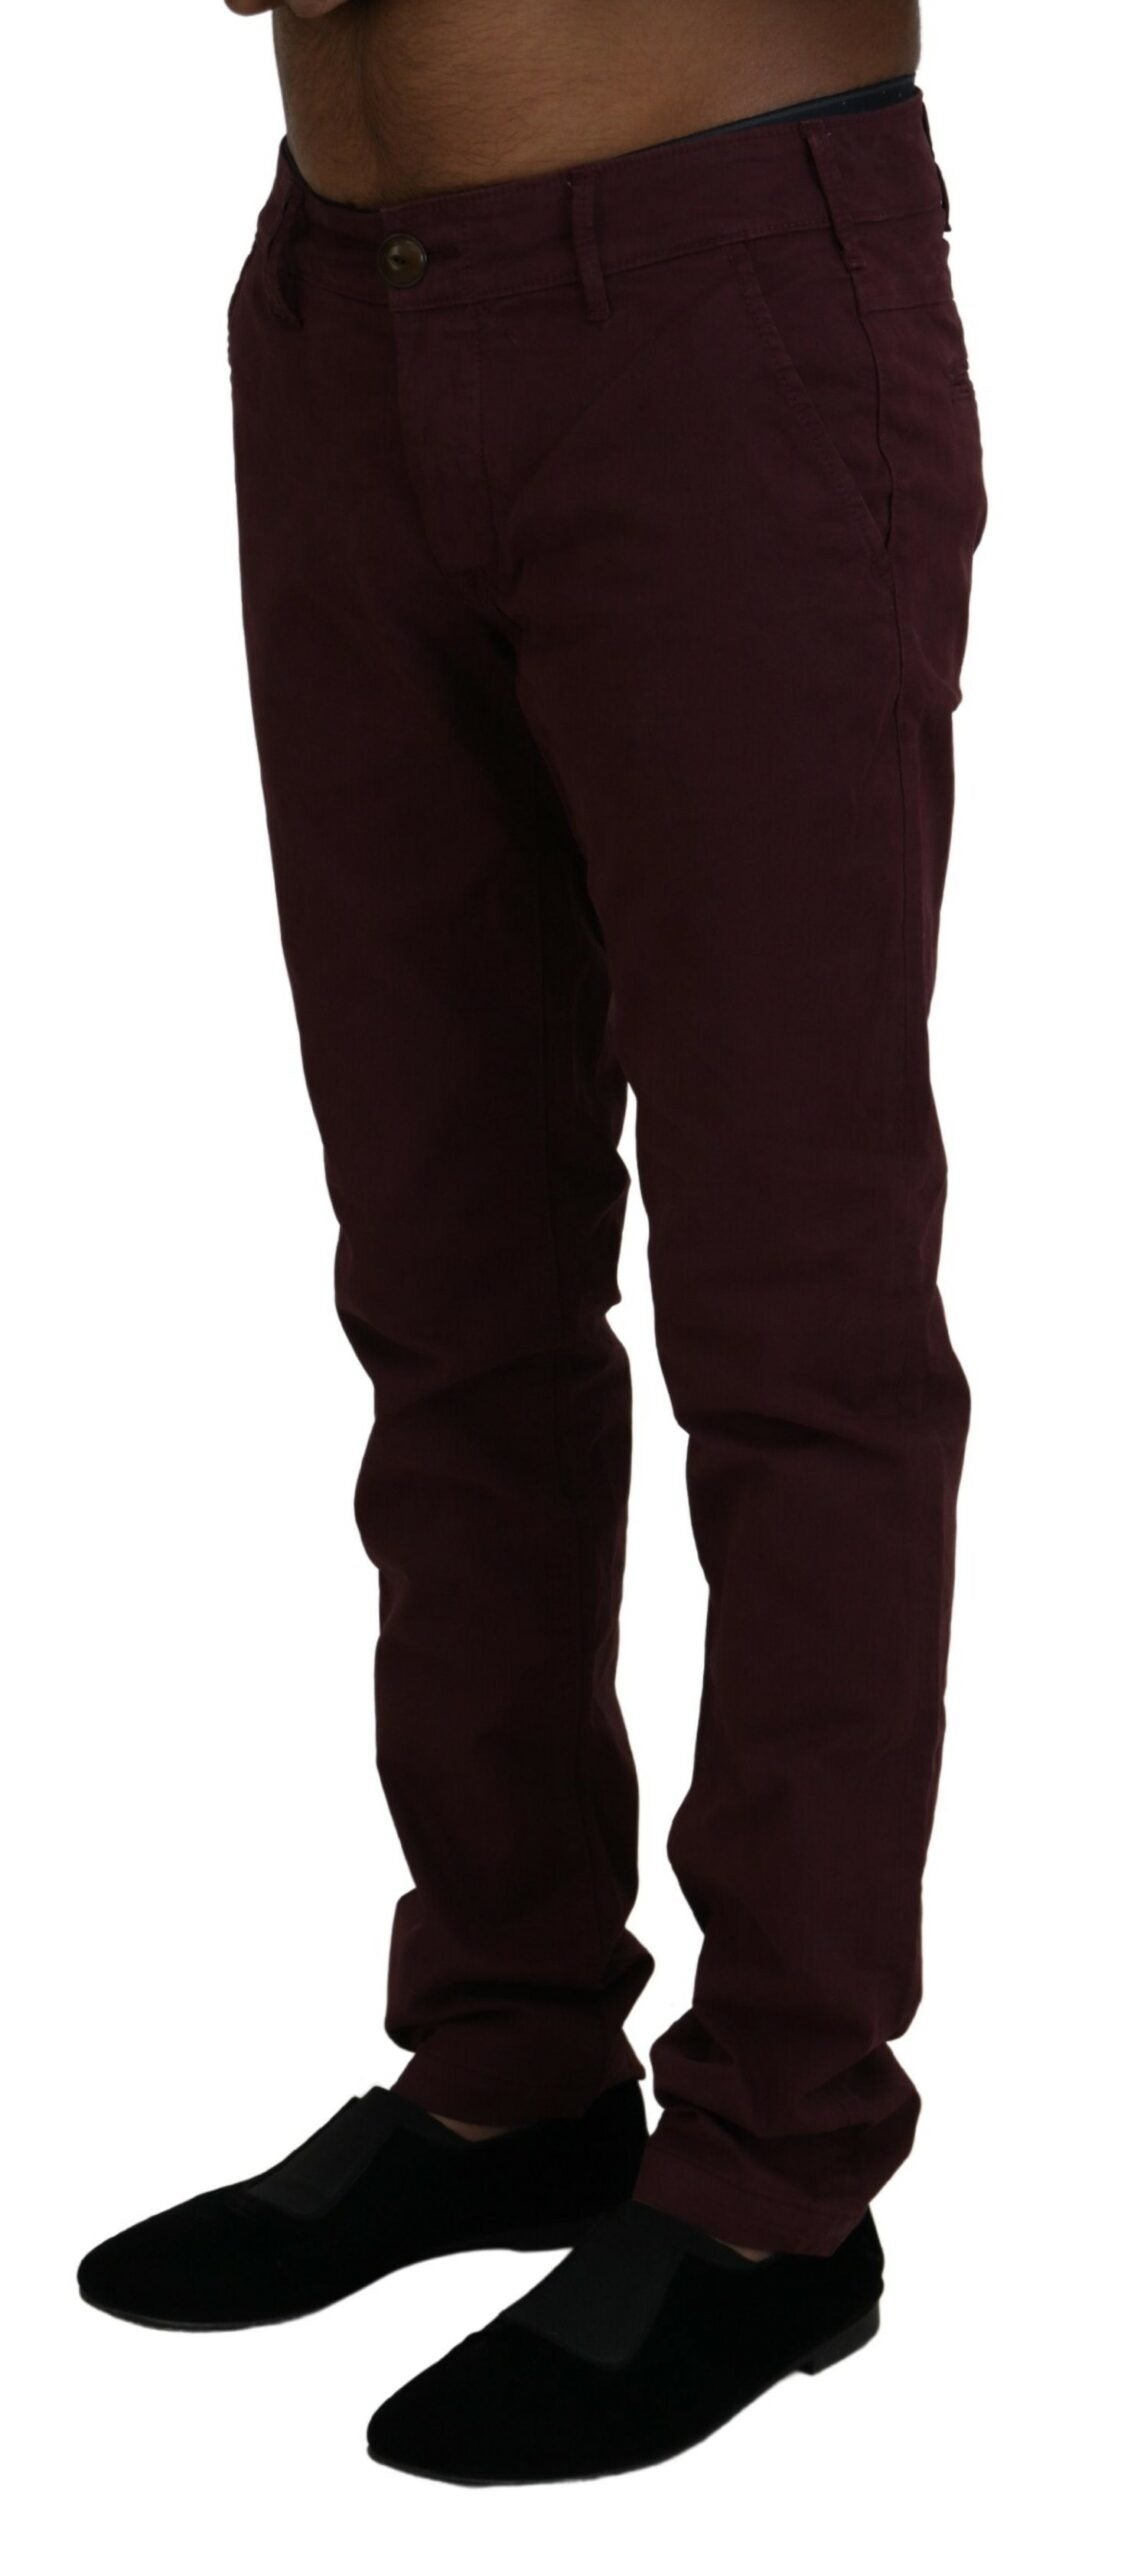 Cycle Maroon Cotton Stretch Skinny Casual Men Pants - Designed by CYCLE Available to Buy at a Discounted Price on Moon Behind The Hill Online Designer Discount Store